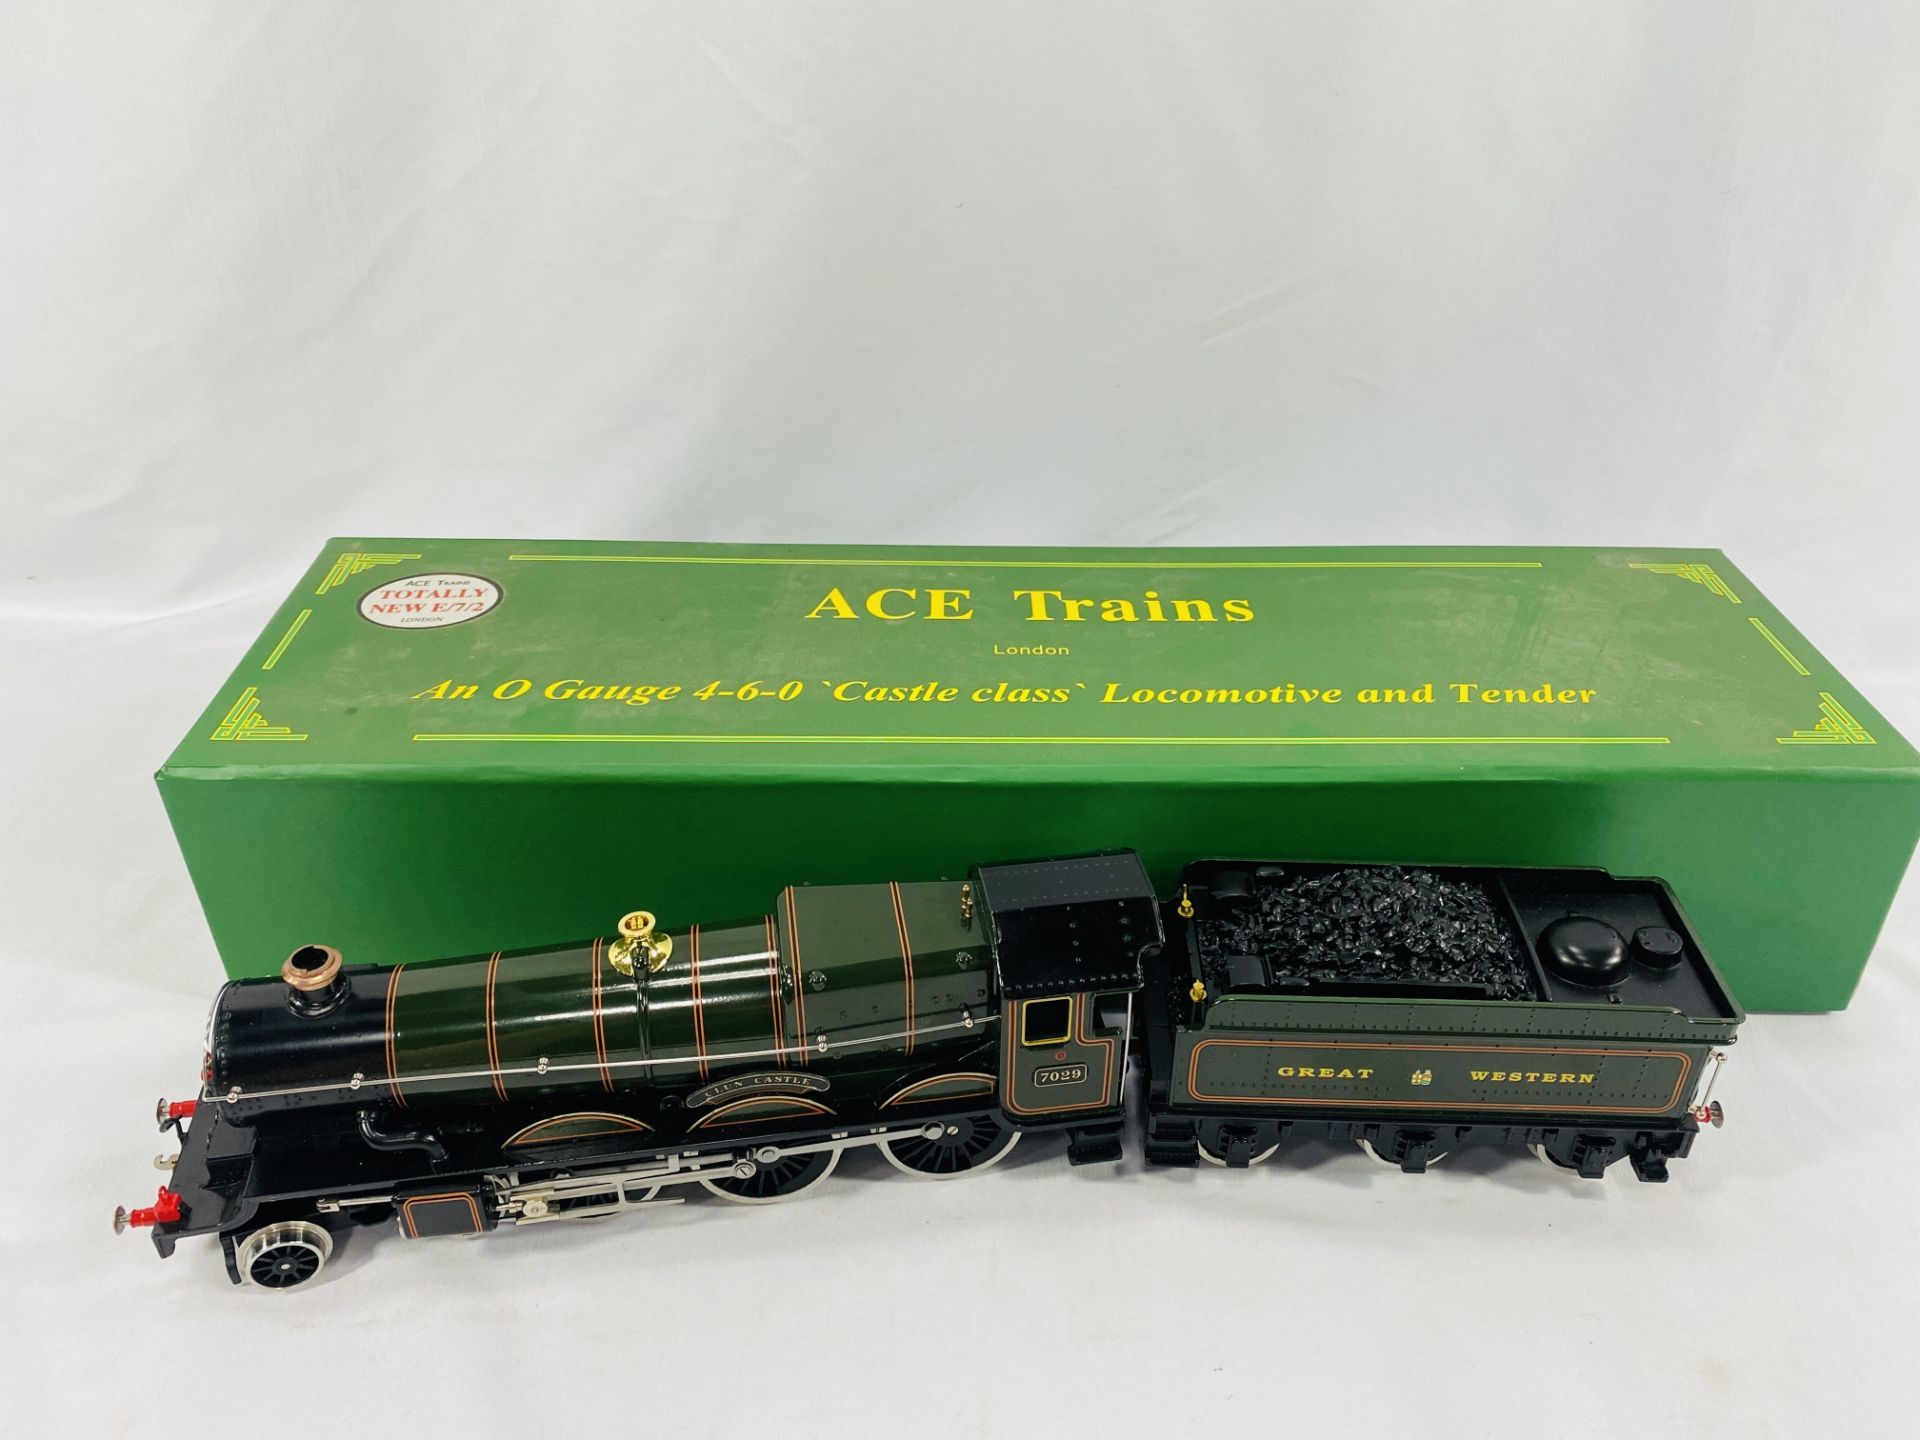 Boxed Ace Trains O Gauge 4-6-0 'Castle class' locomotive and tender